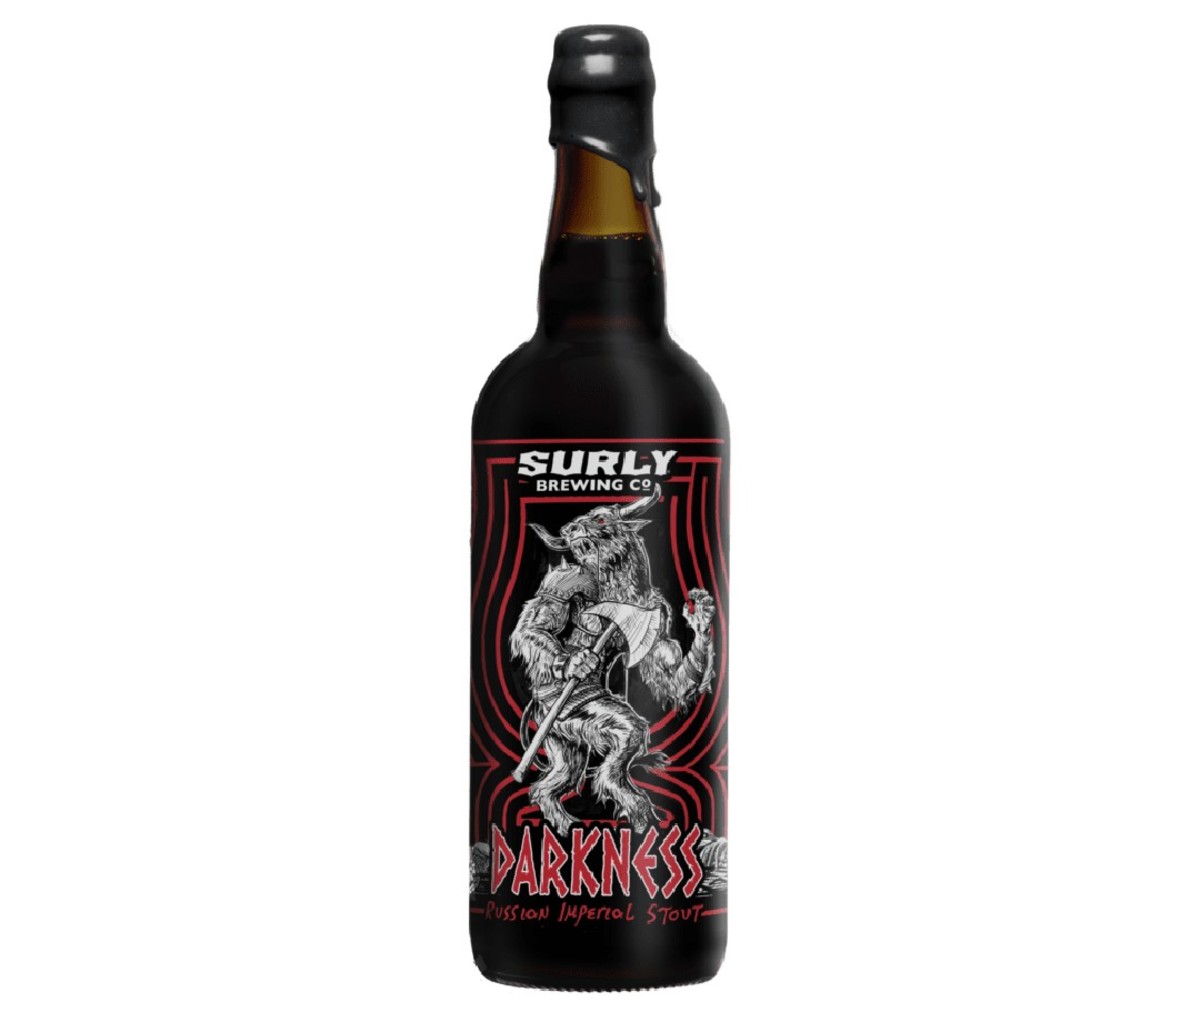 Bottle of Surly Darkness stout beer